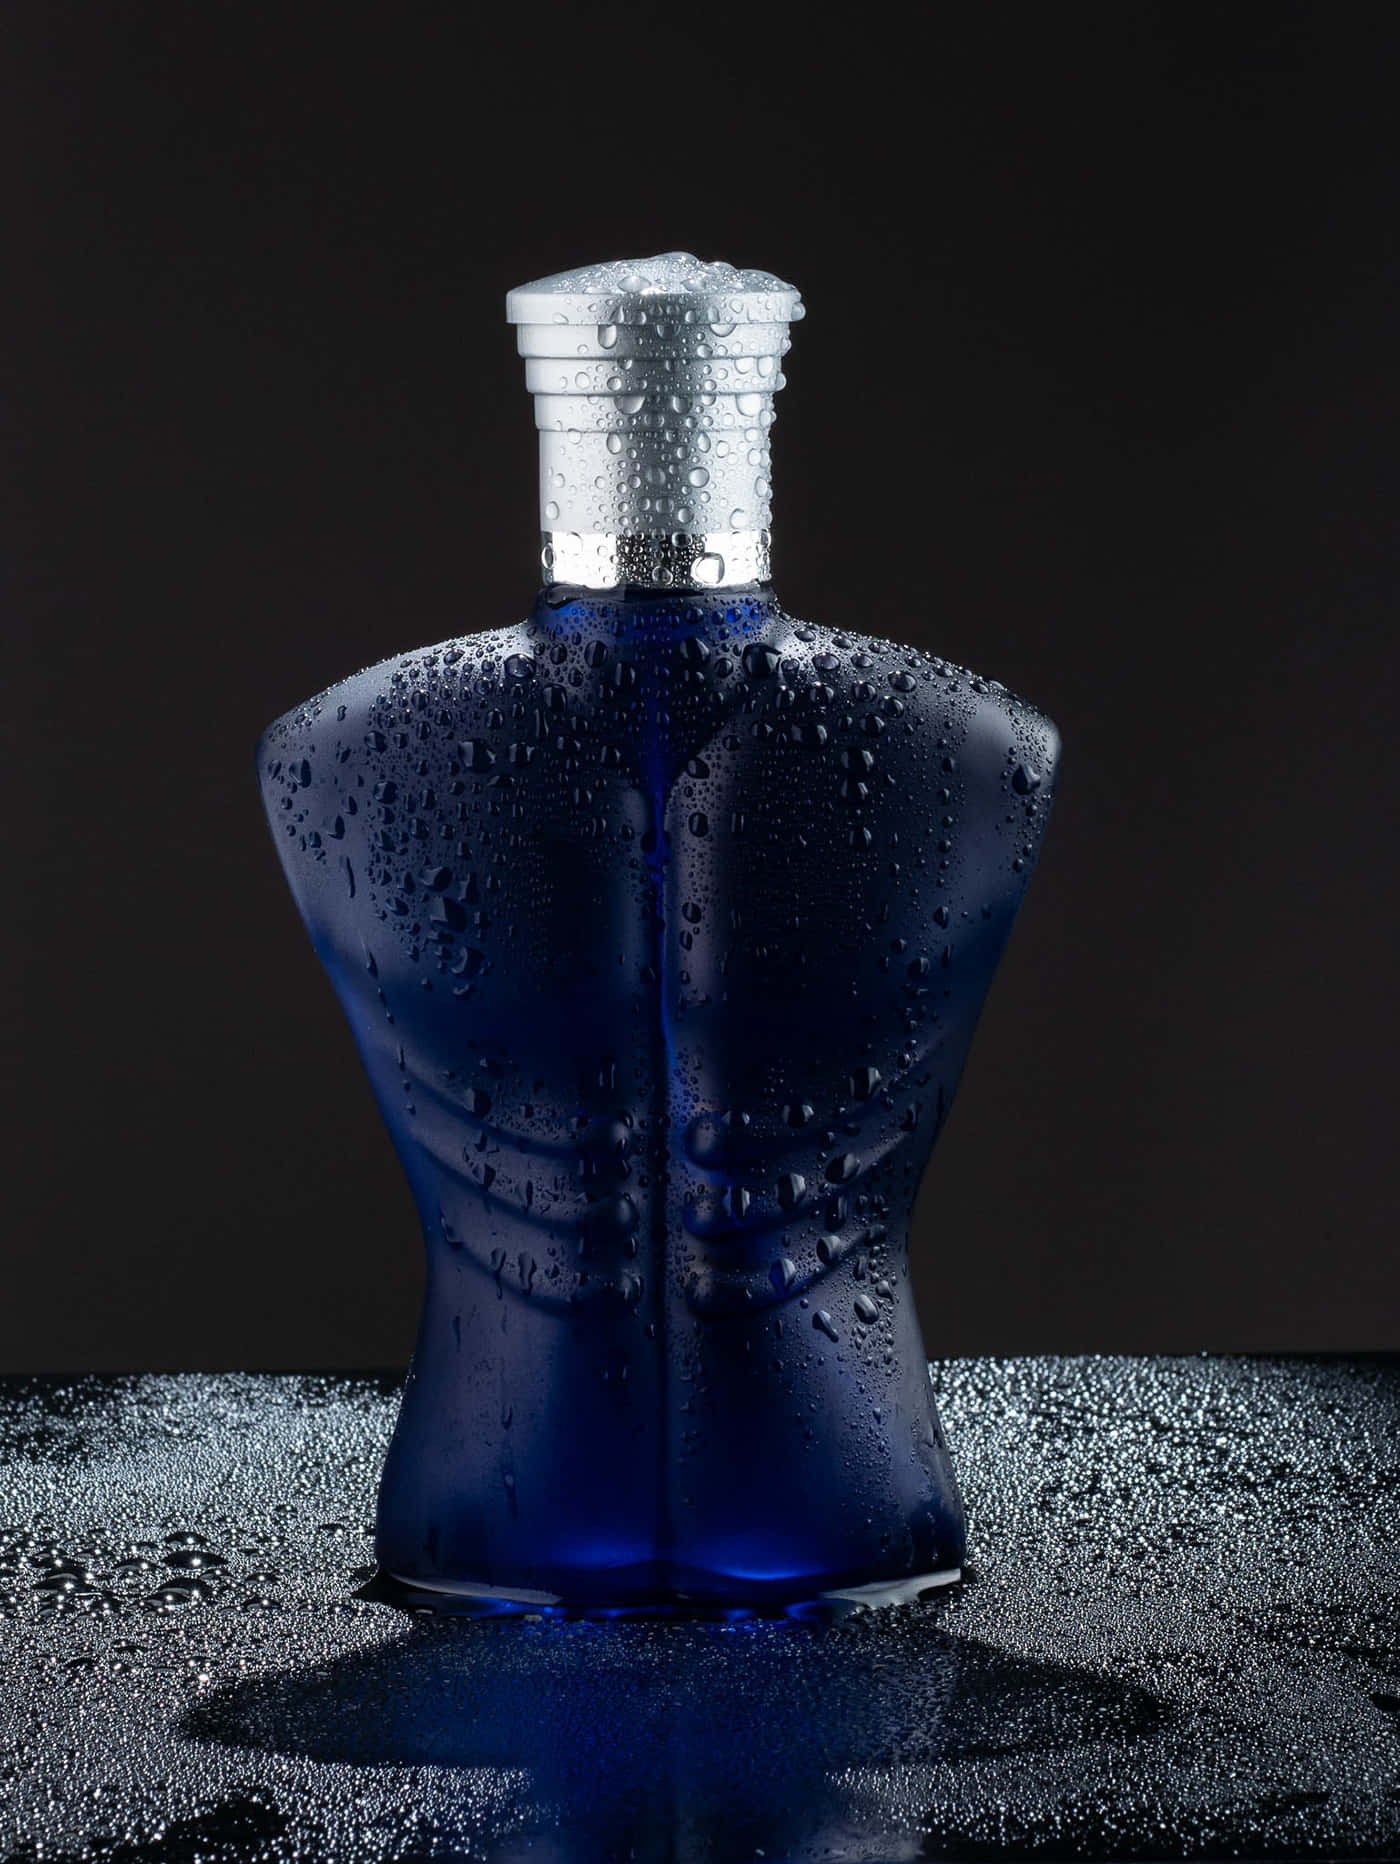 A Blue Bottle Of Perfume Sitting On A Black Background